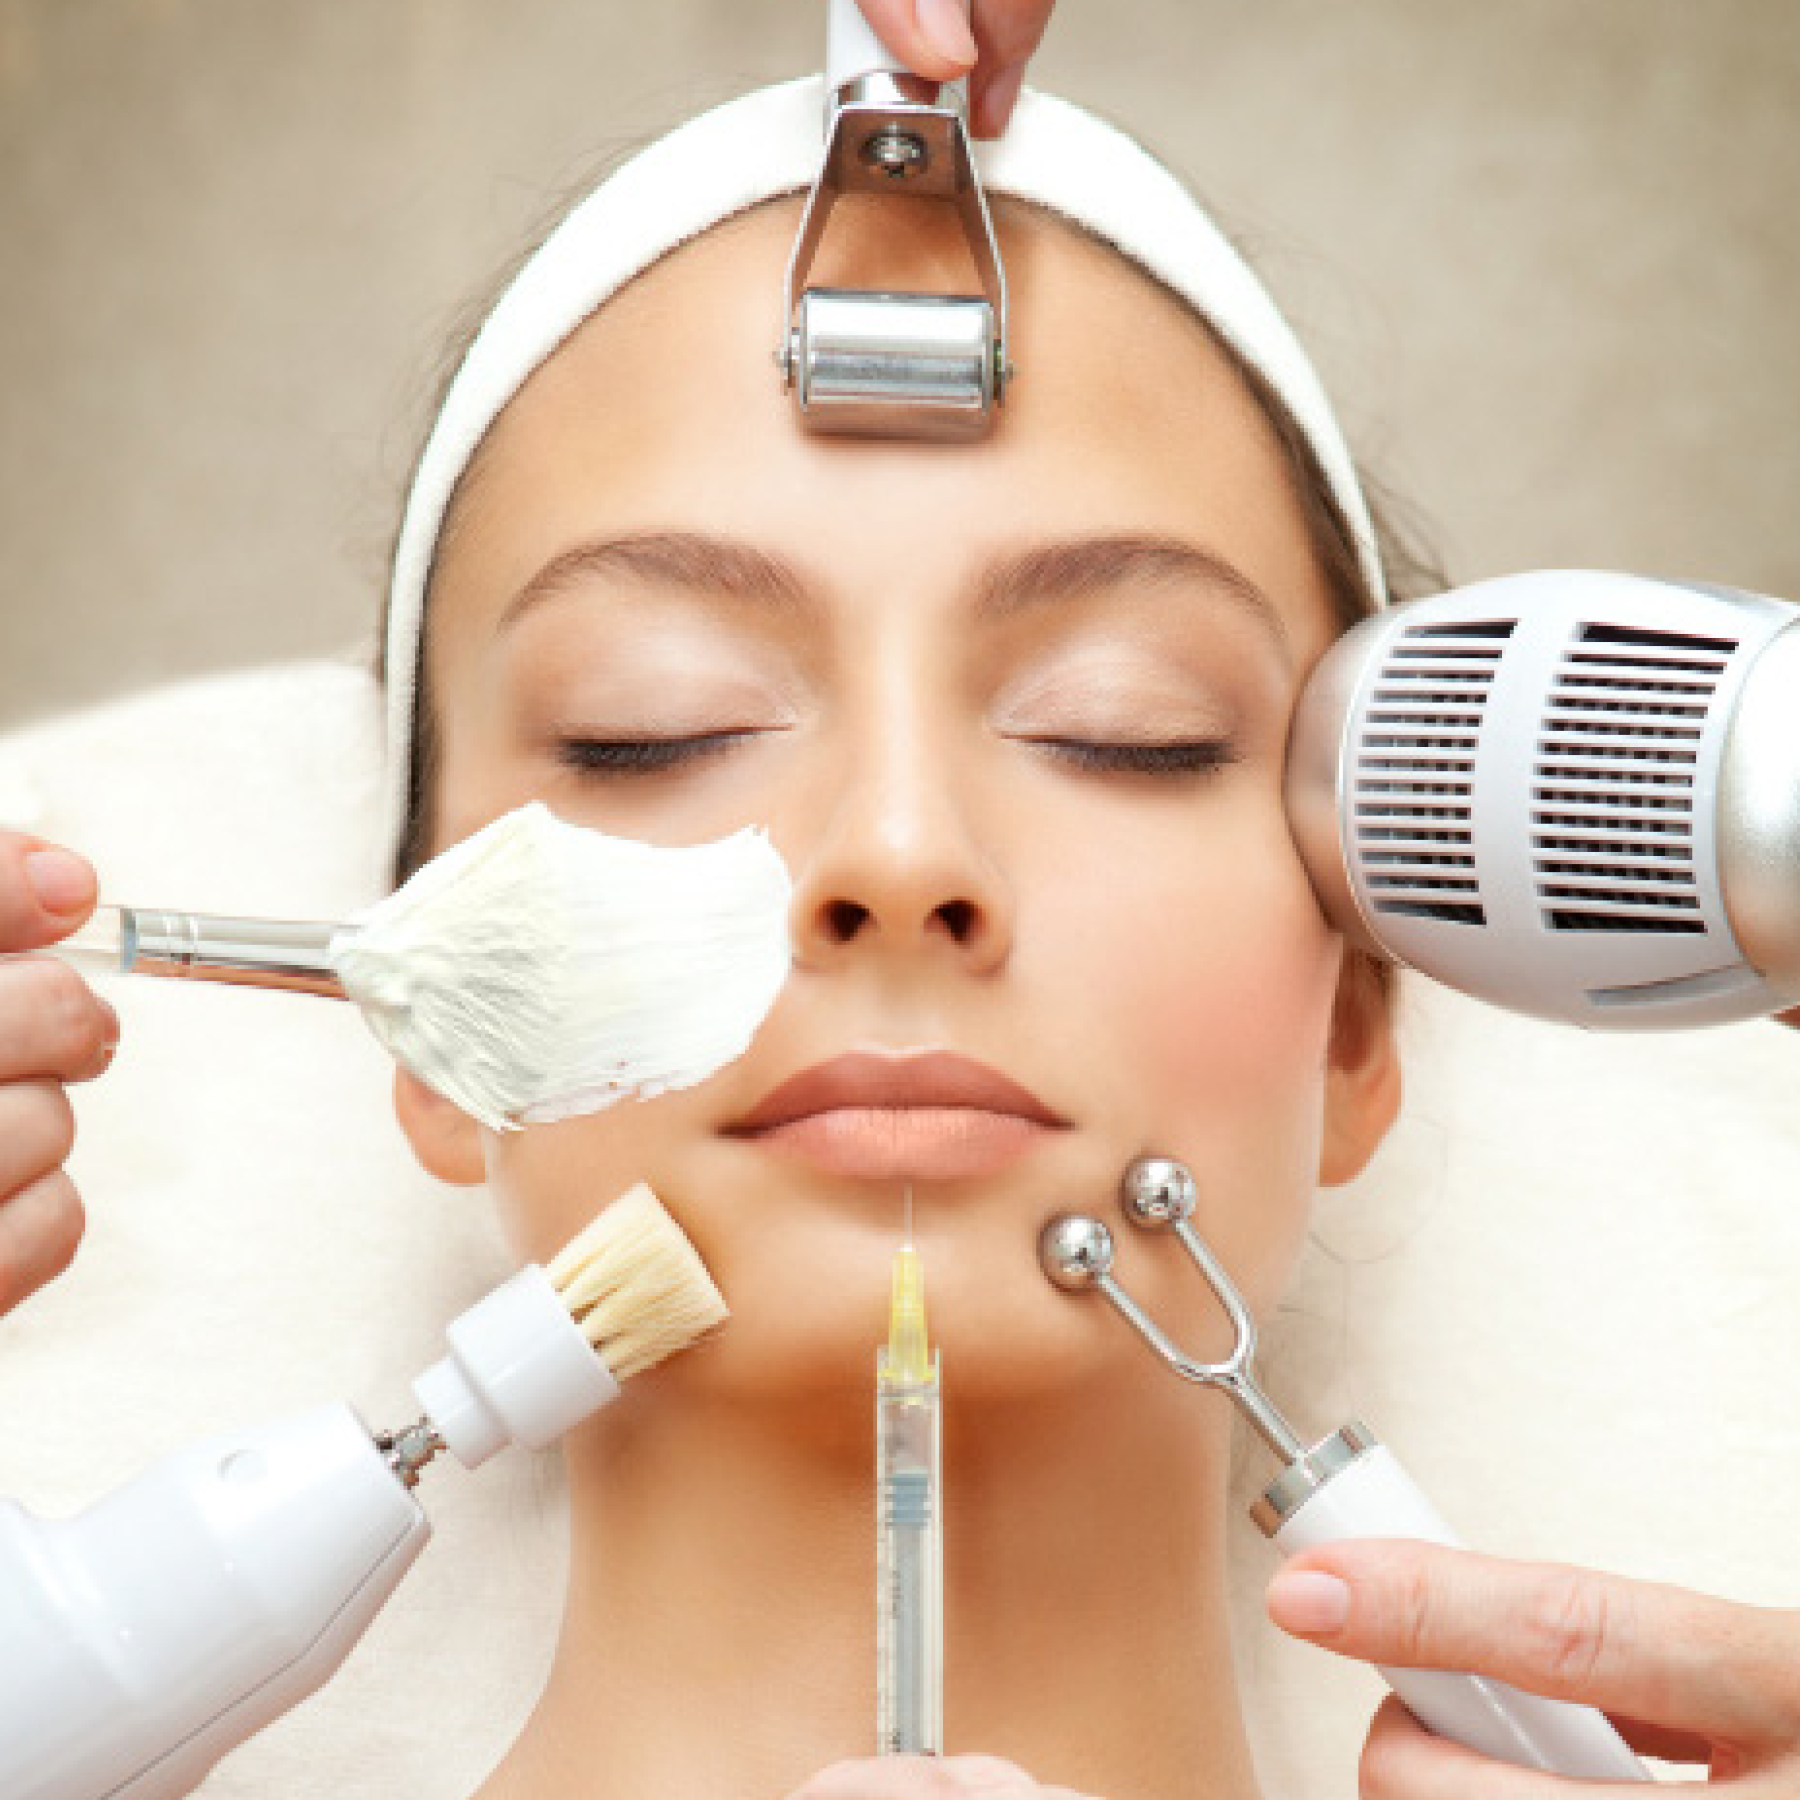 Woman receiving treatments from beauty therapists including cosmetic injections, mask facial, dermaroller, and massage